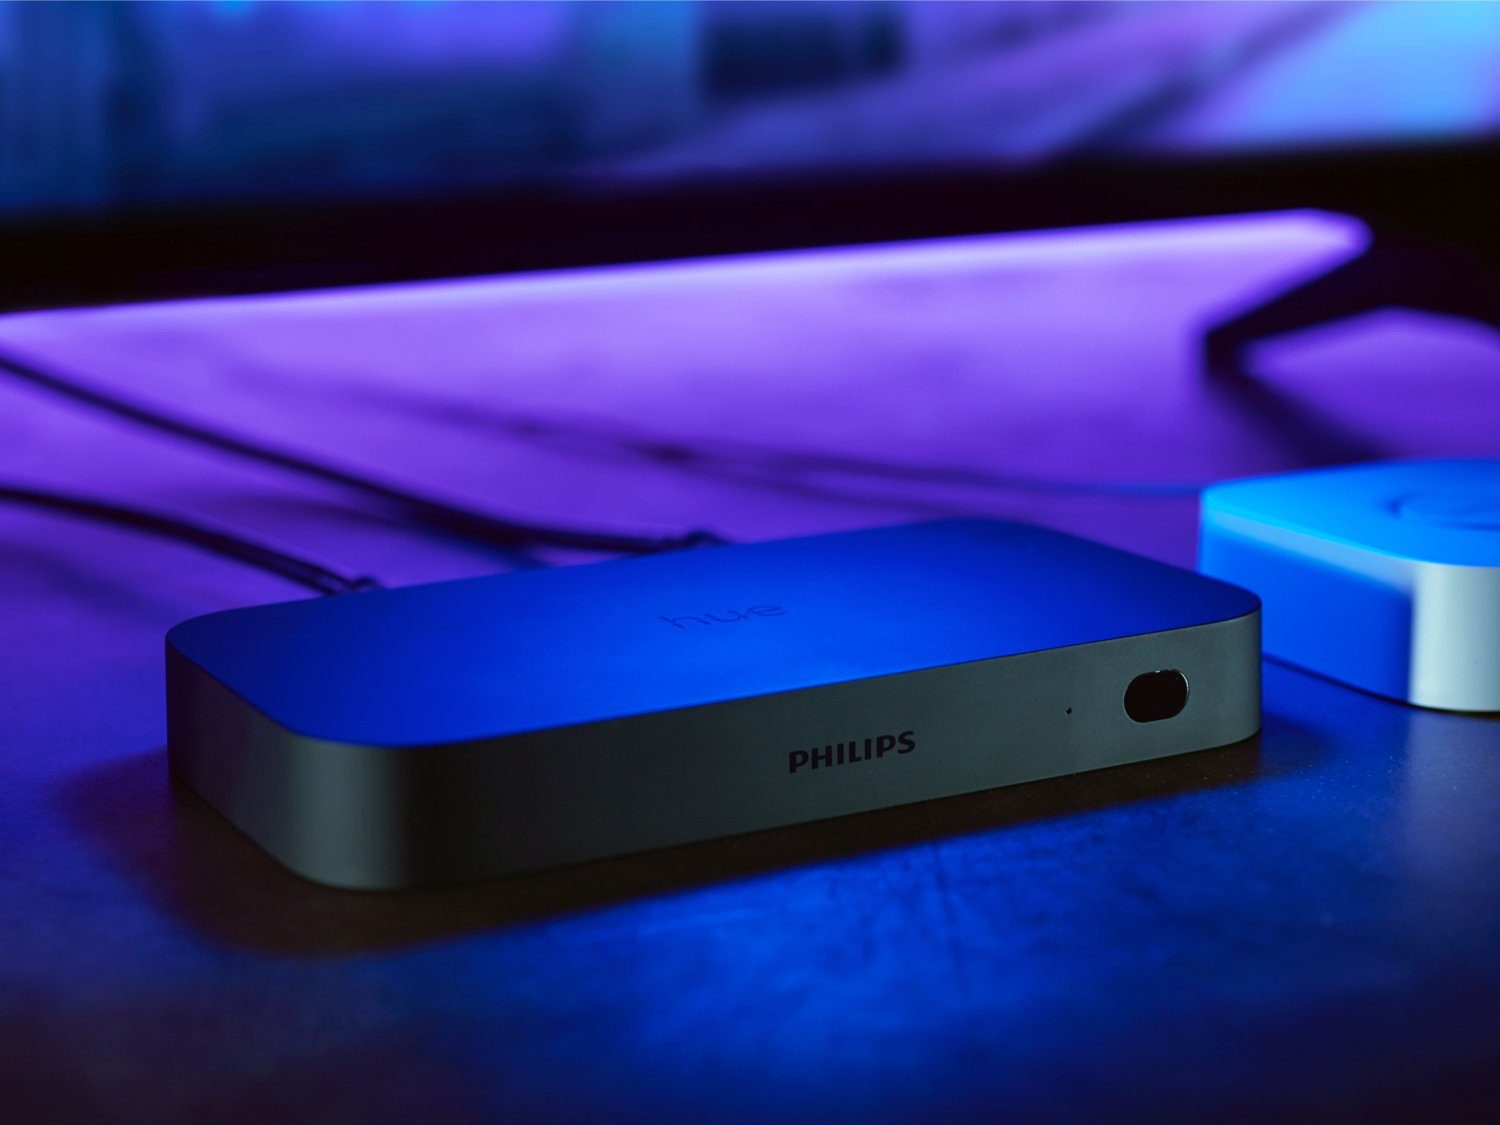 Philips Hue Smart-Home-Steuerelement HDMI Play Box Sync